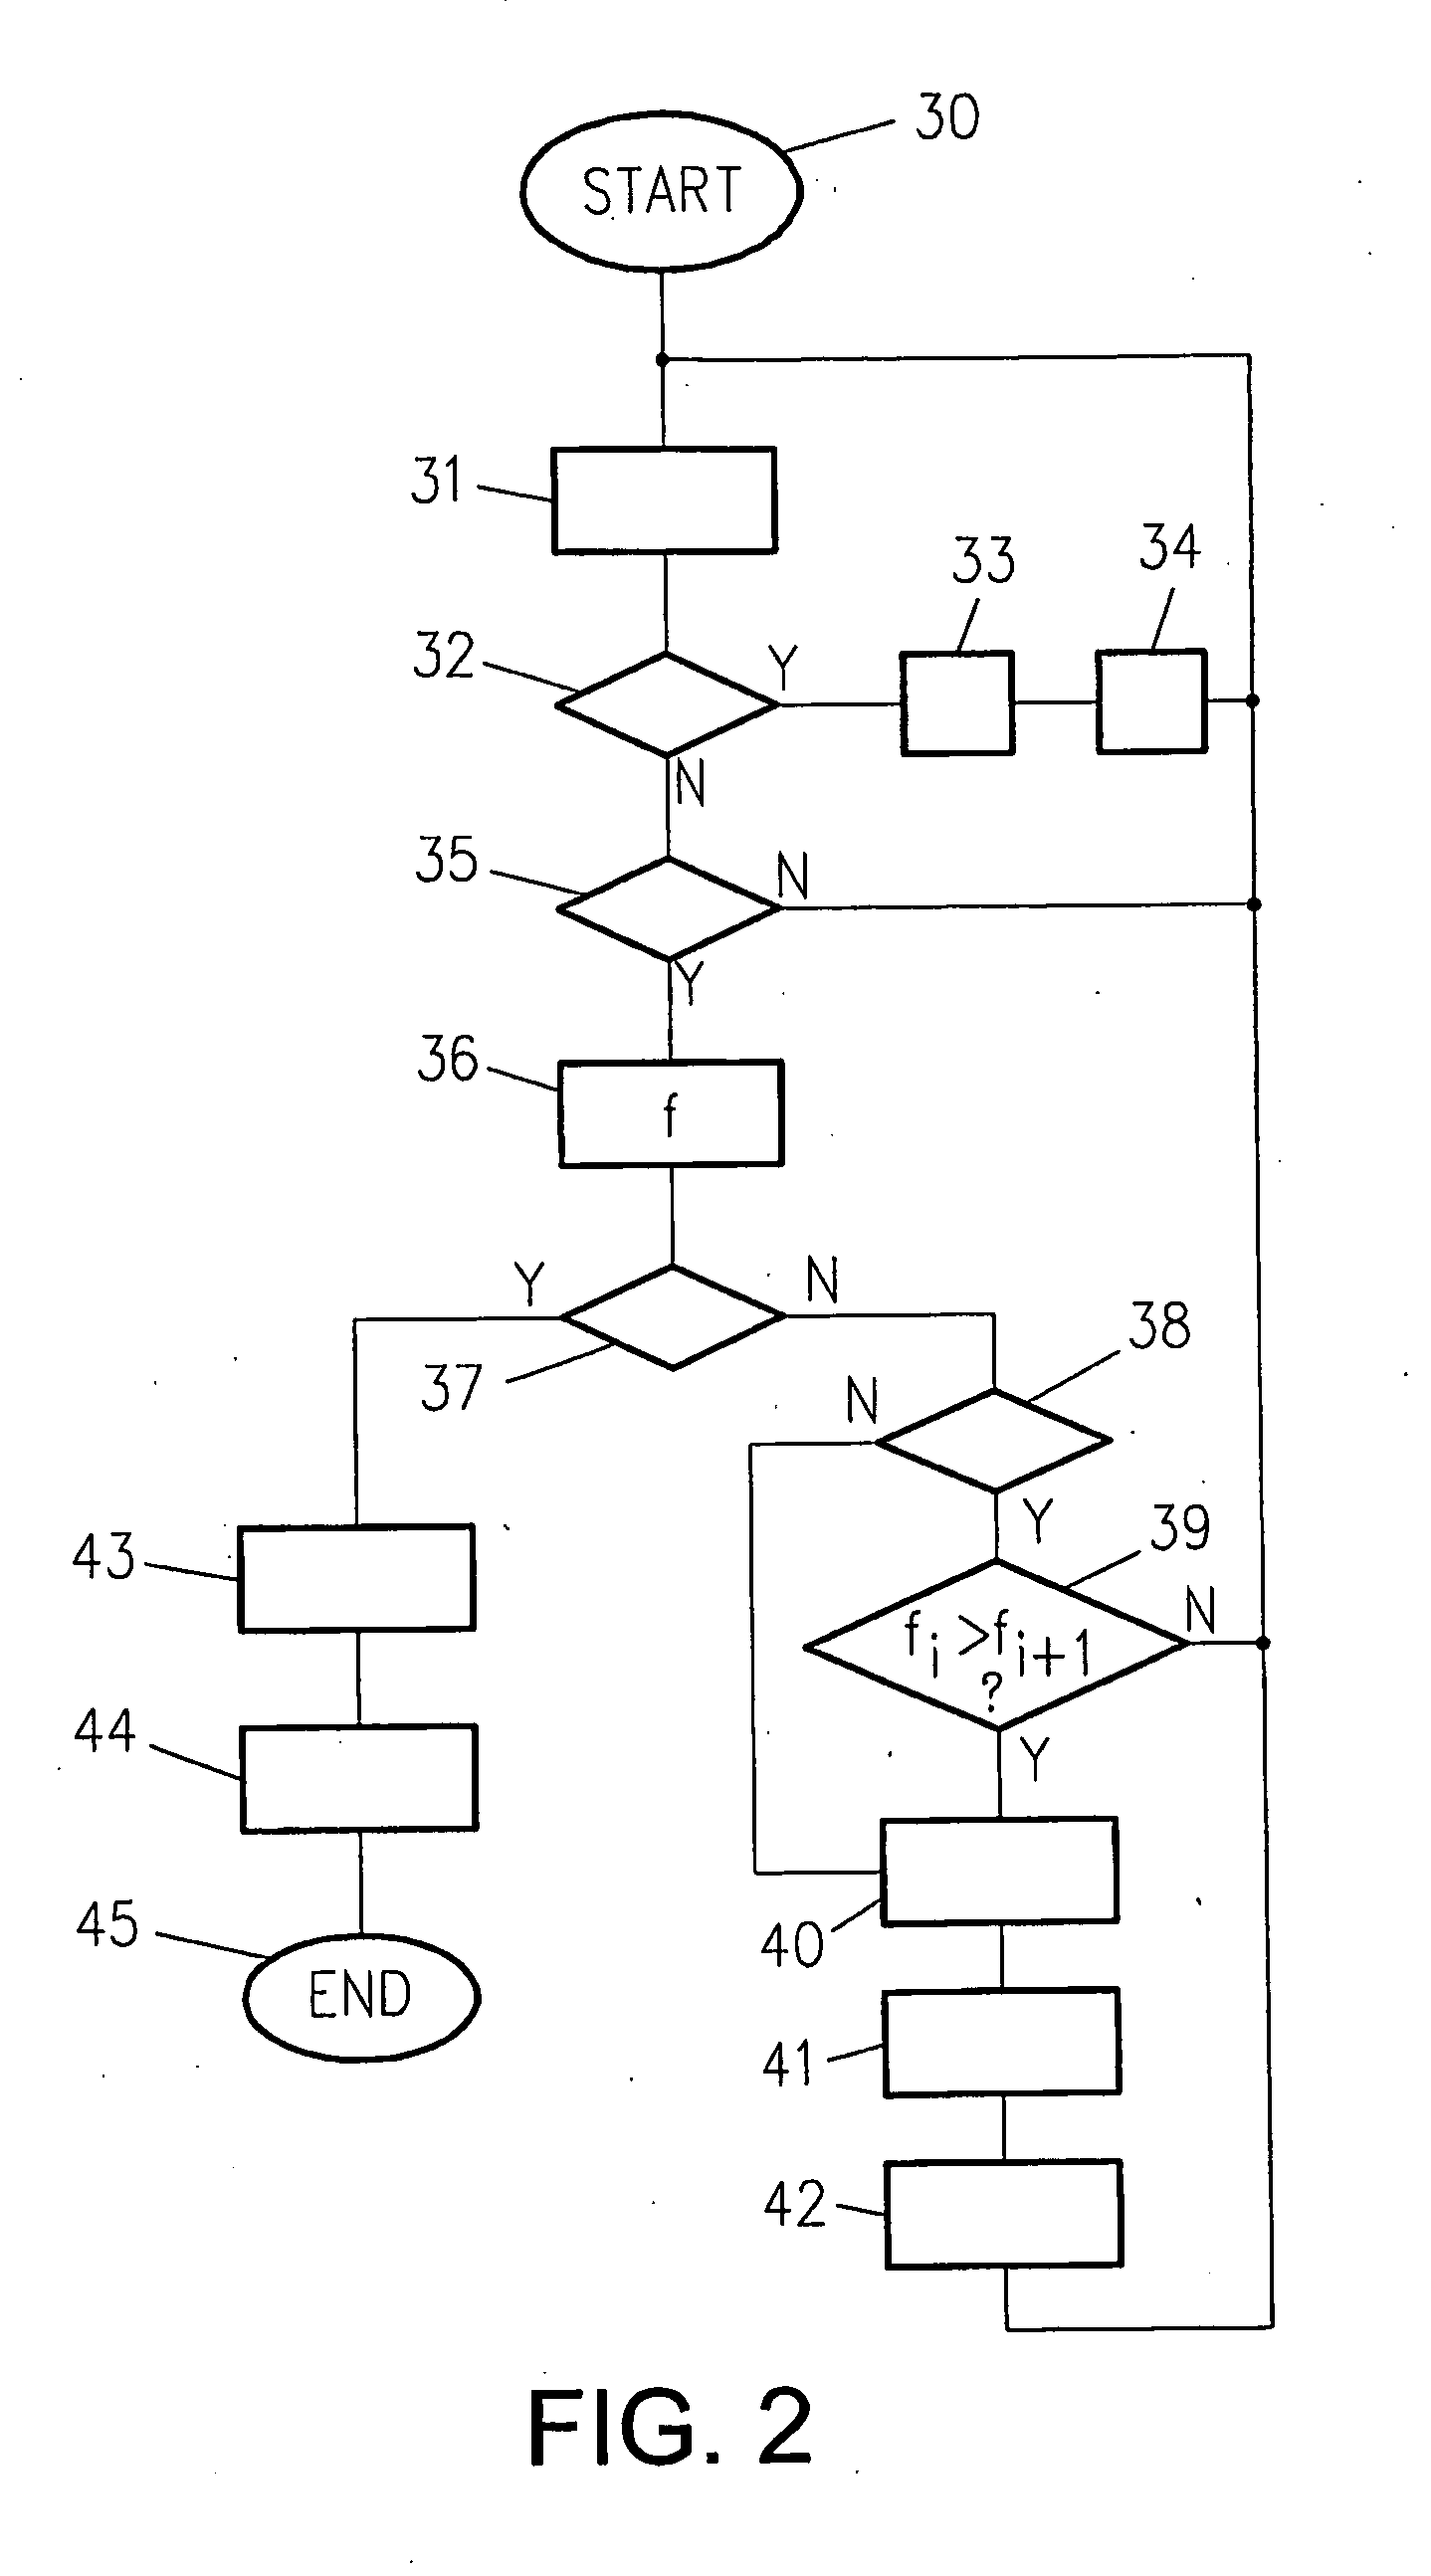 System for and method of controlling playback of audio signals